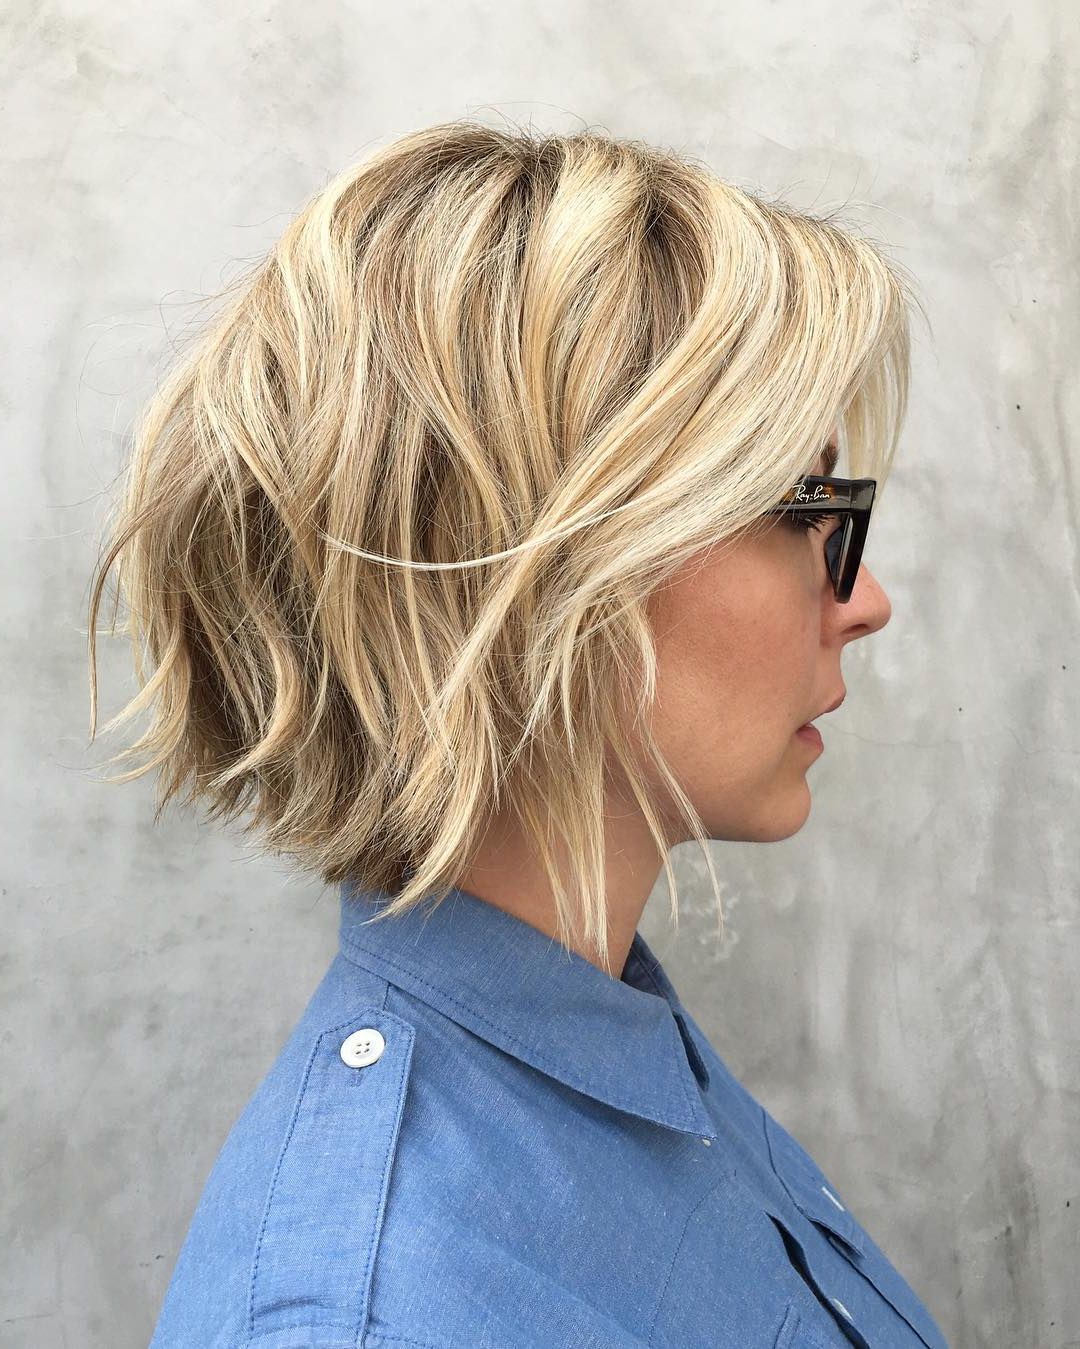 Shag Haircuts And Hairstyles In 2019 — Therighthairstyles Throughout Recent Layered Bob Shag Haircuts With Balayage (Gallery 20 of 20)